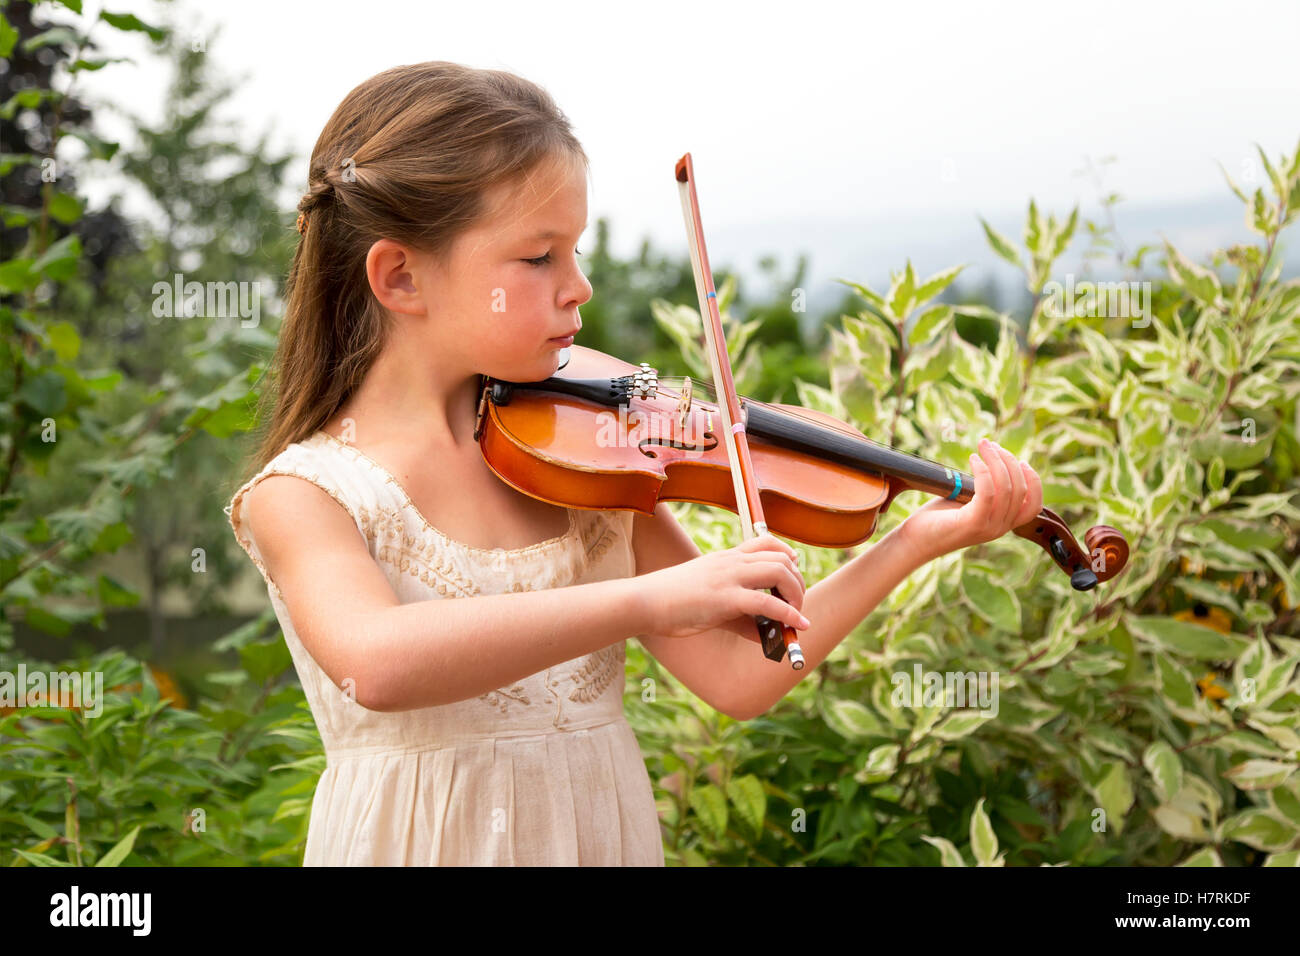 A young girl playing a violin in her yard; Salmon Arm, British Columbia, Canada Stock Photo